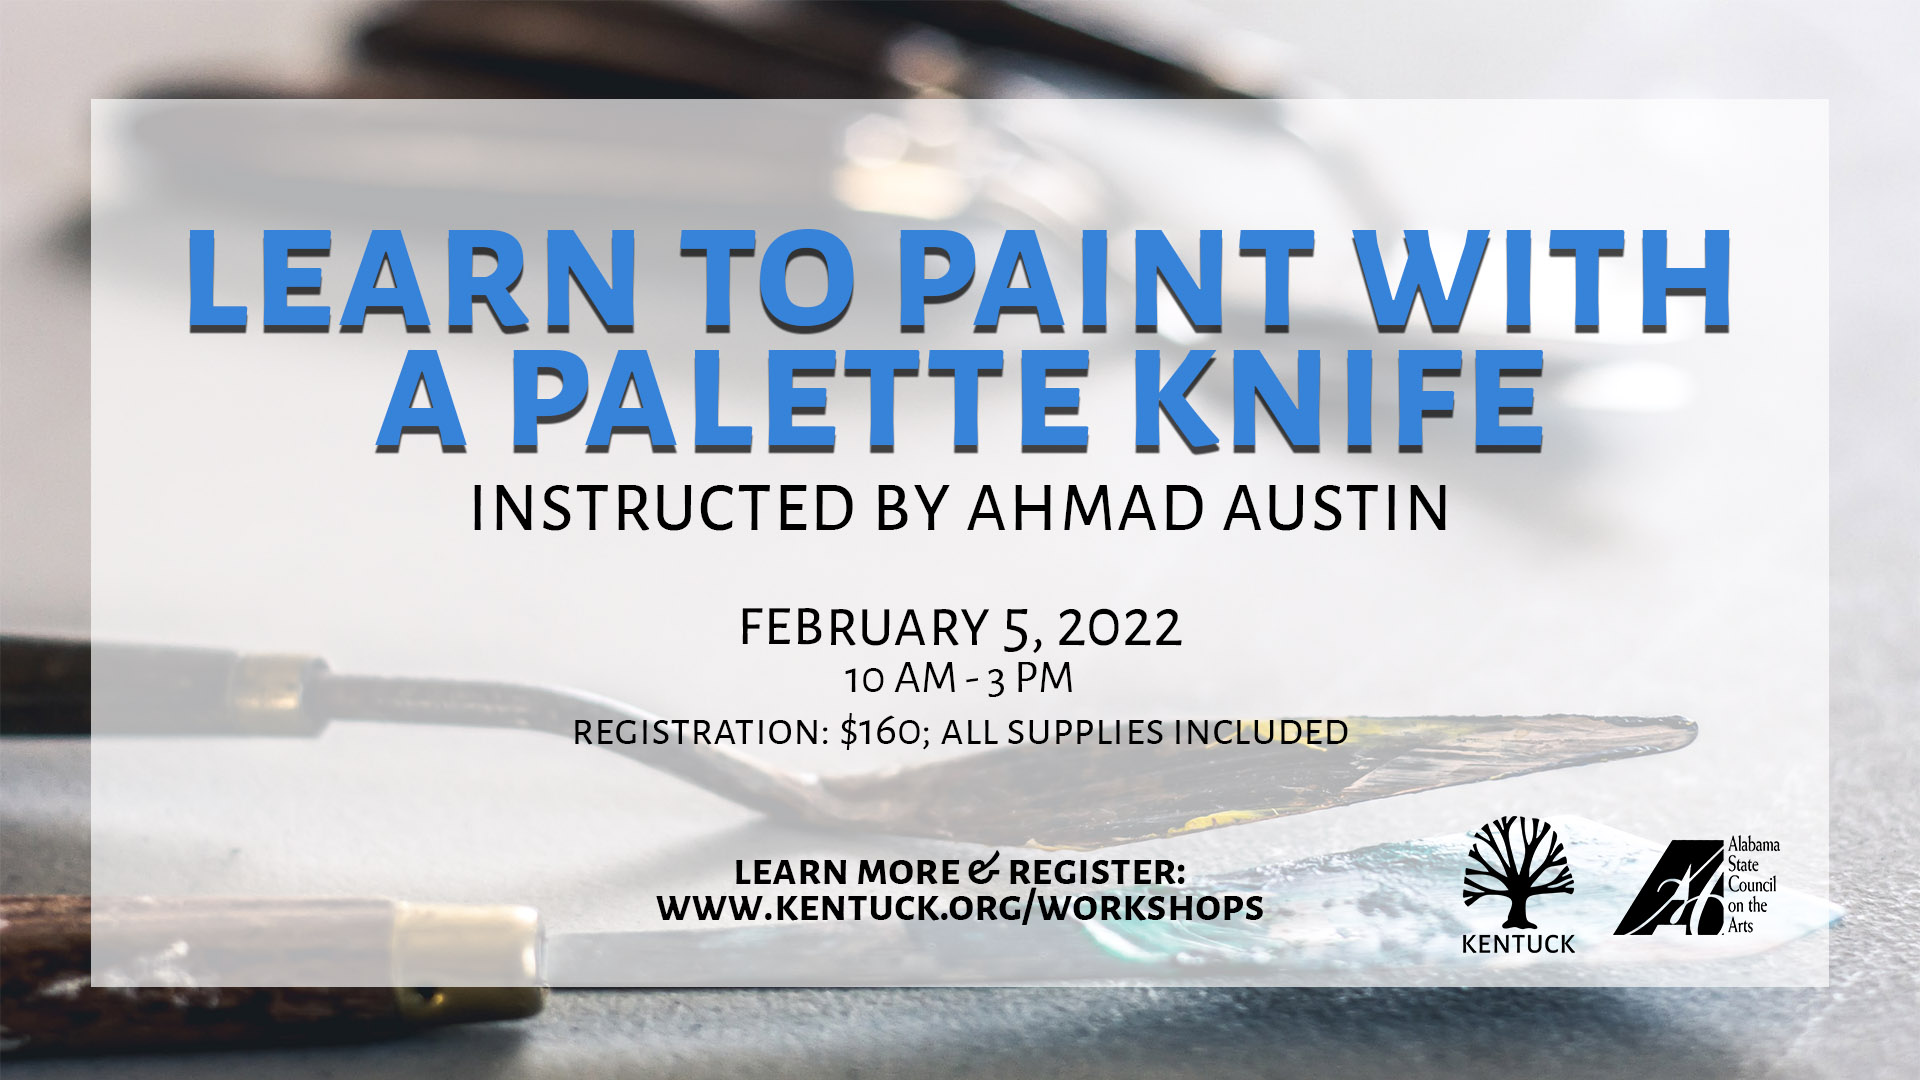 Learn to Paint with a Palette Knife with Ahmad Austin